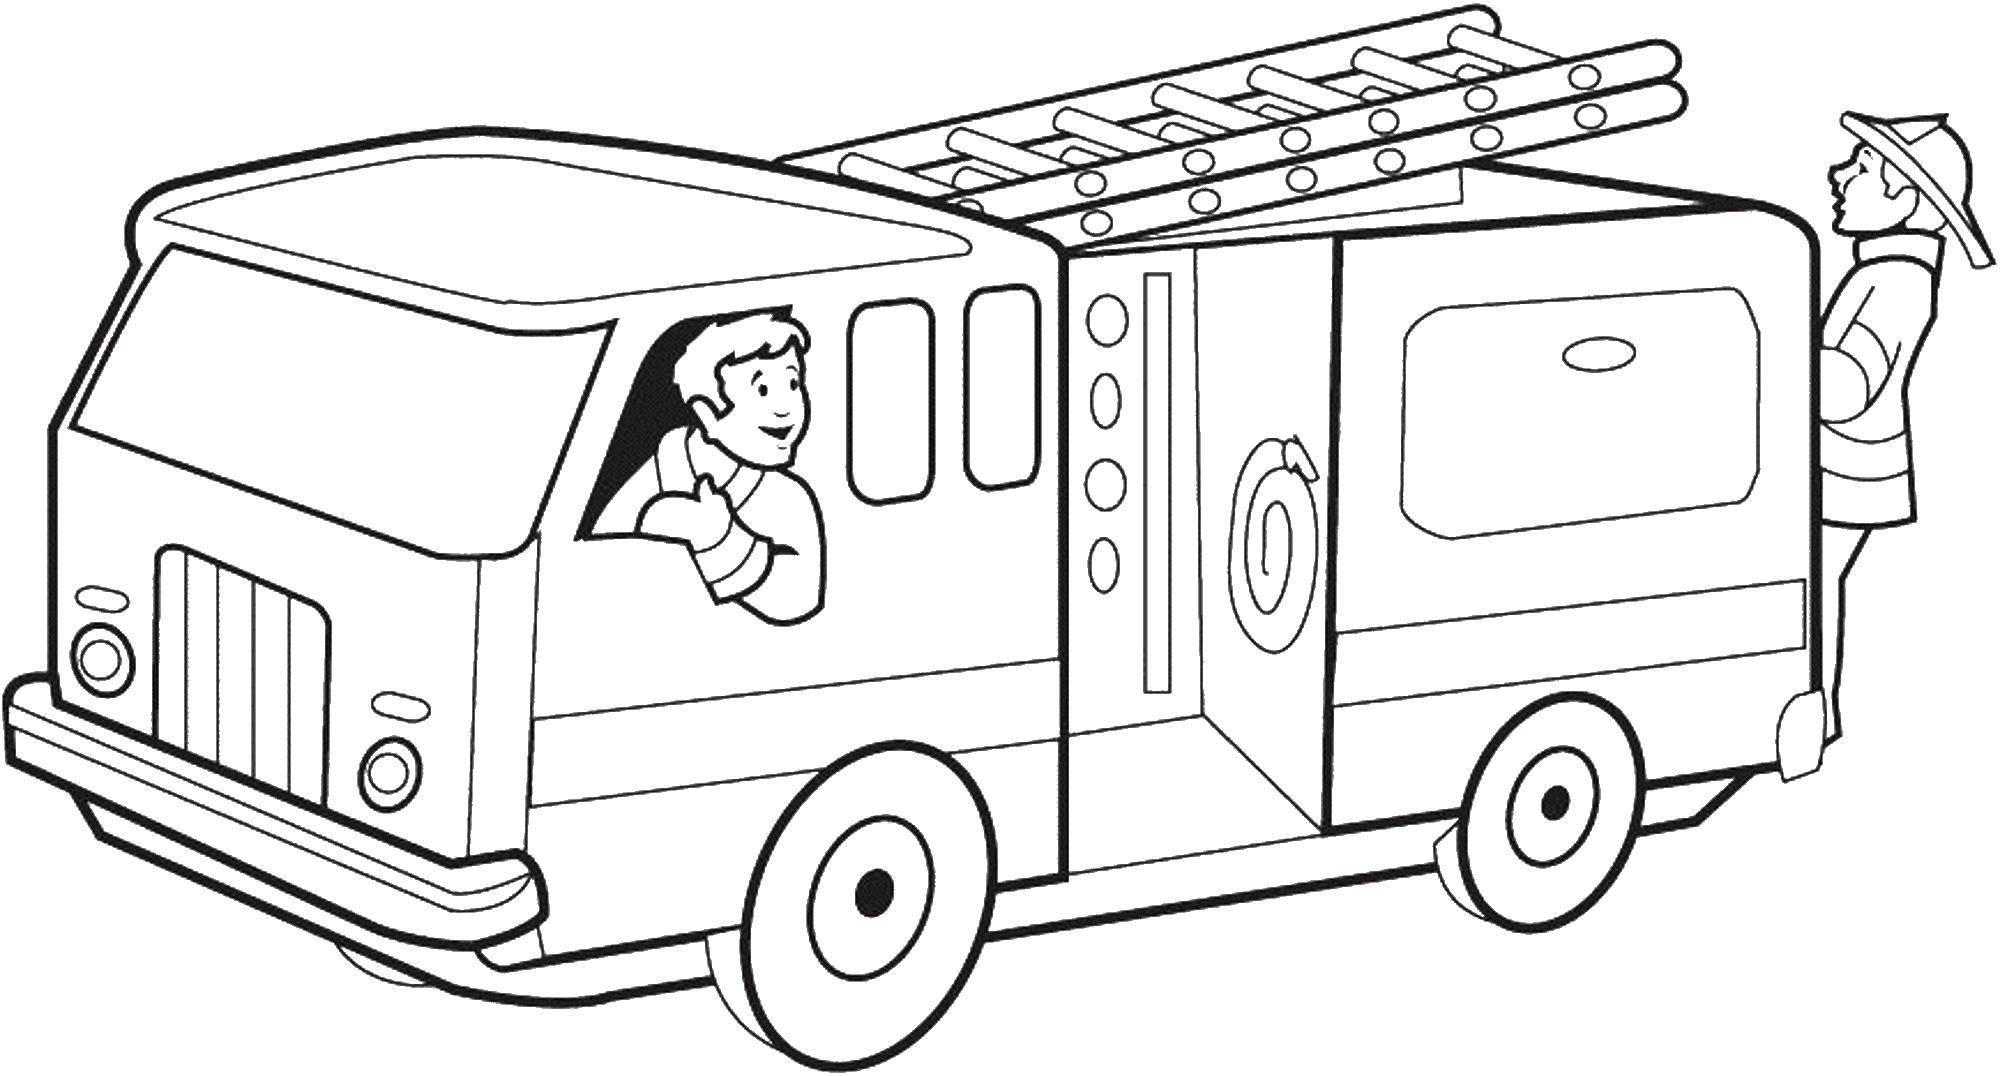 Coloring Firefighters are coming by car. Category coloring book firefighter. Tags:  fire truck.